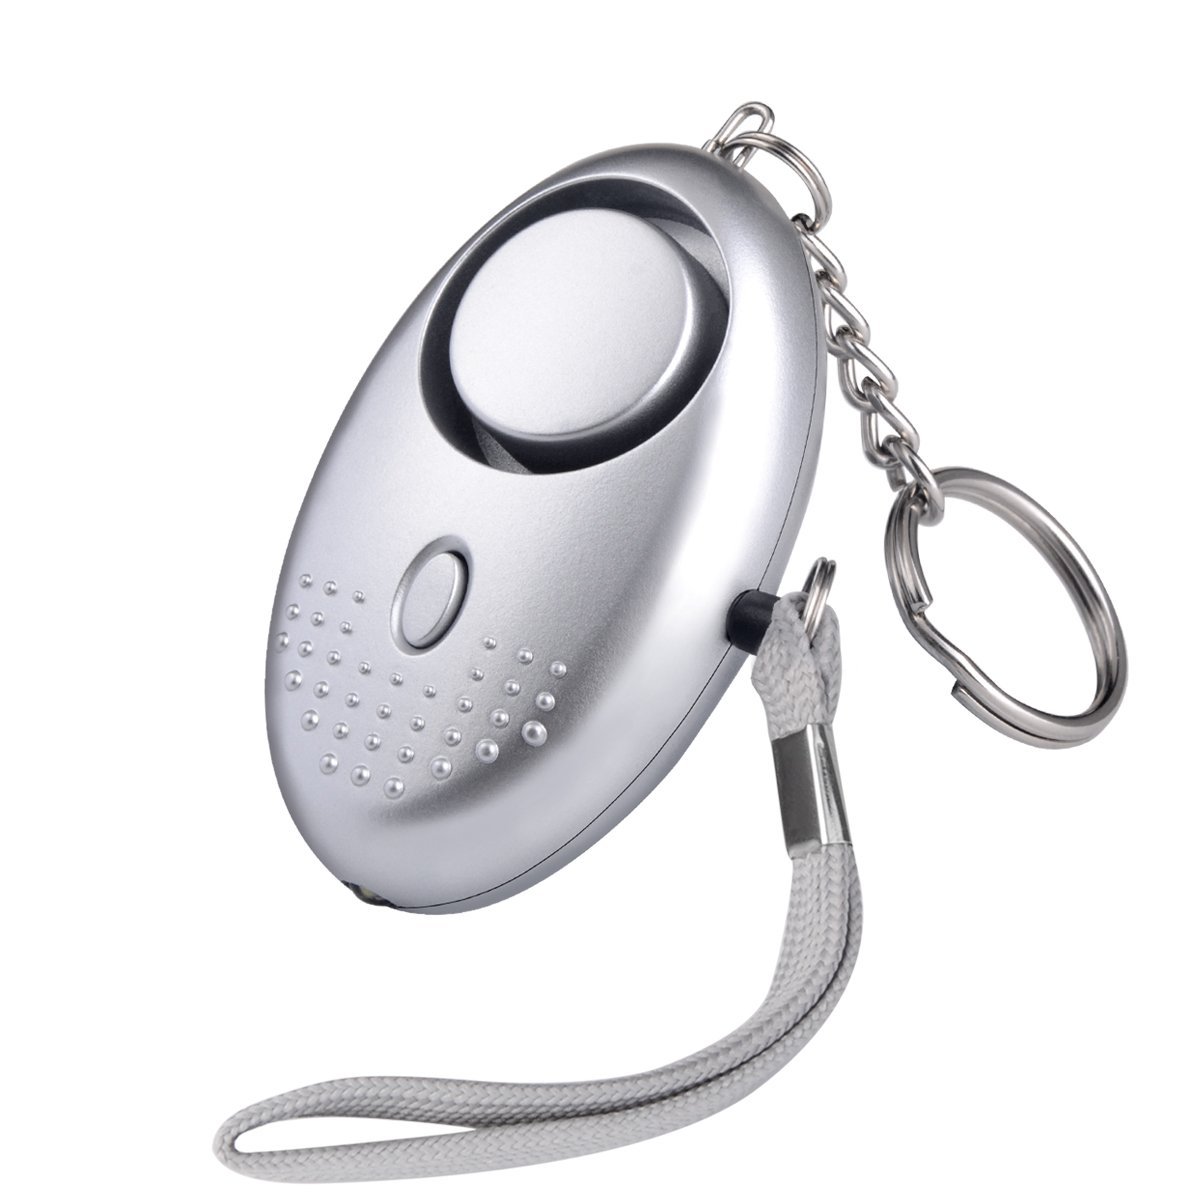 1Pc Personal Alarm Keychain Attack Anti SOS Emergency Self Defense Safety Alarms 